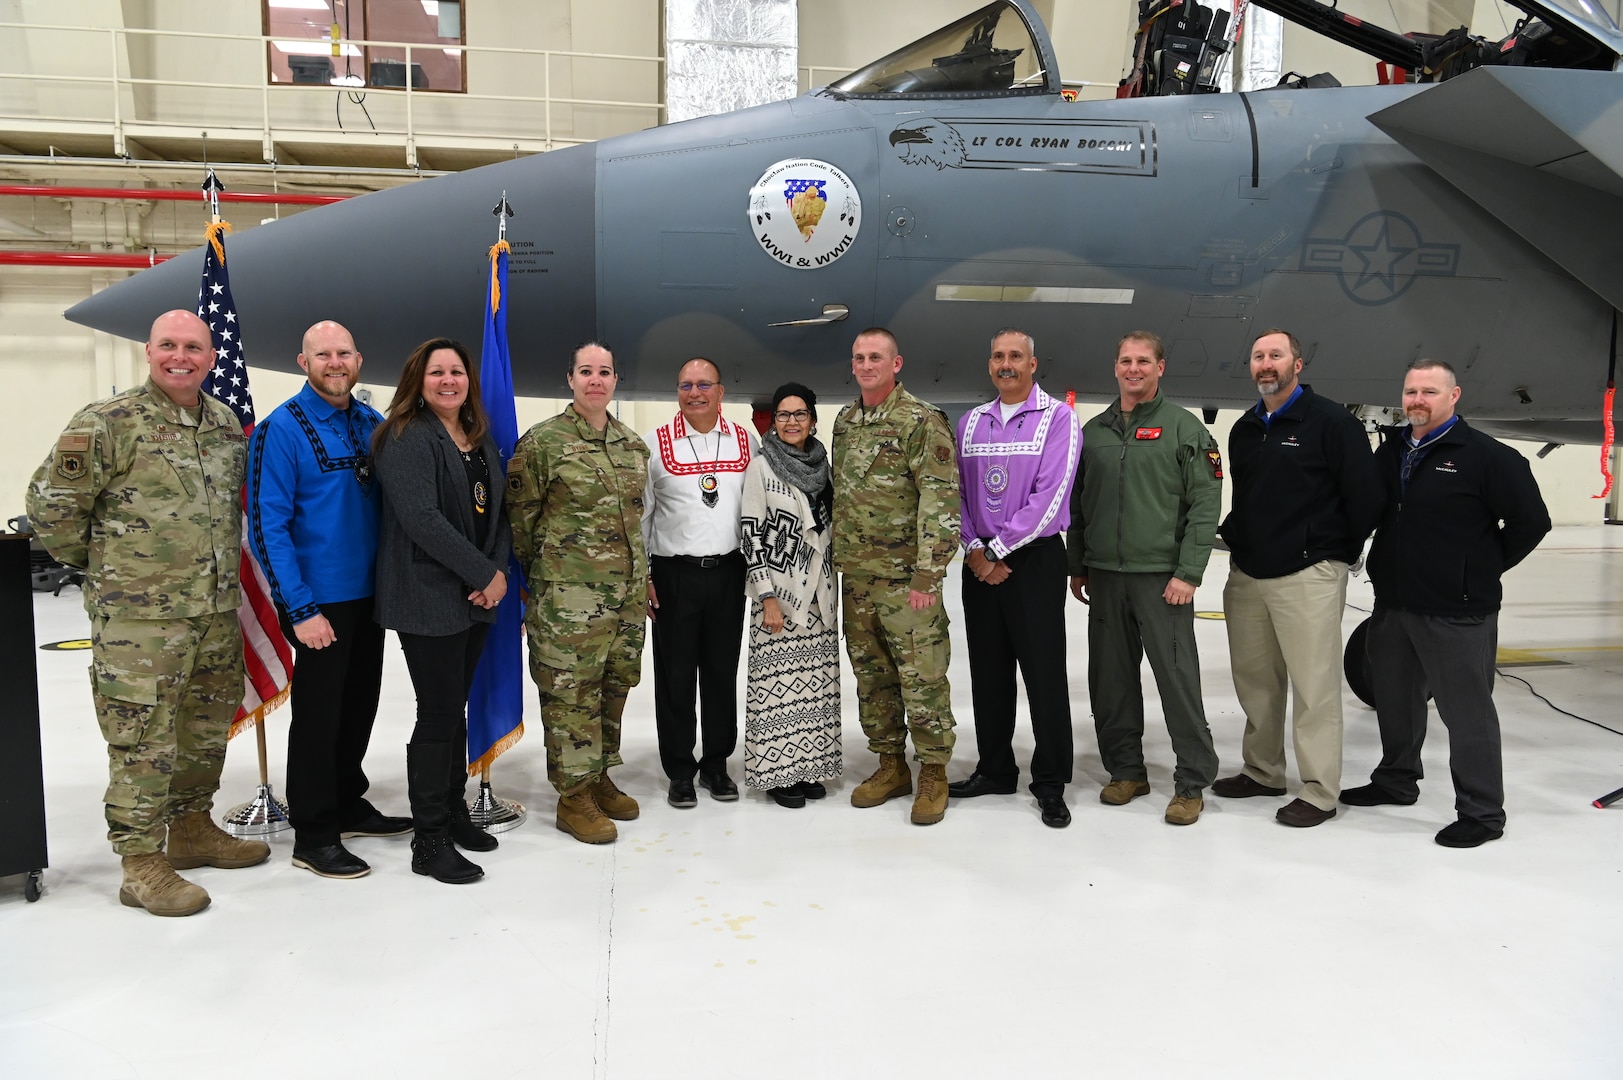 Members of the 173rd Fighter Wing and visiting dignitaries from the Choctaw Nation stand in front of the newly commissioned nose art, April 14, 2022, at Kingsley Field in Klamath Falls, Ore. Oregon Air National Guard Staff Sgt. Robert Holster, the dedicated crew chief, commissioned the artwork to pay homage to his lineage as a member of the Choctaw Tribe and his service to the U.S. military.